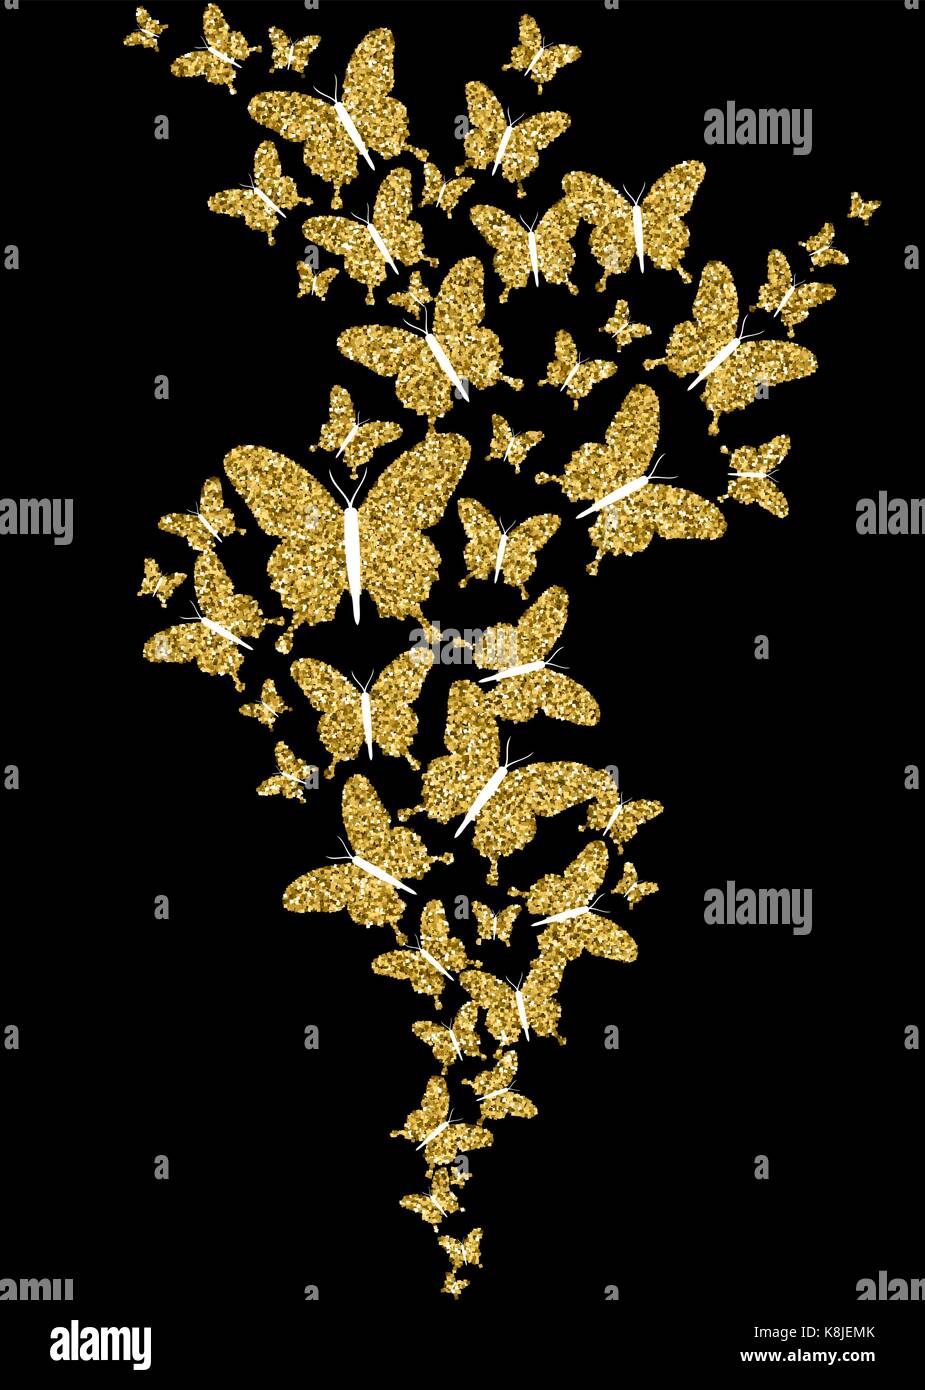 Gold spring butterflies flying on empty background, concept illustration. Butterfly group made of golden glitter texture. EPS10 vector. Stock Vector